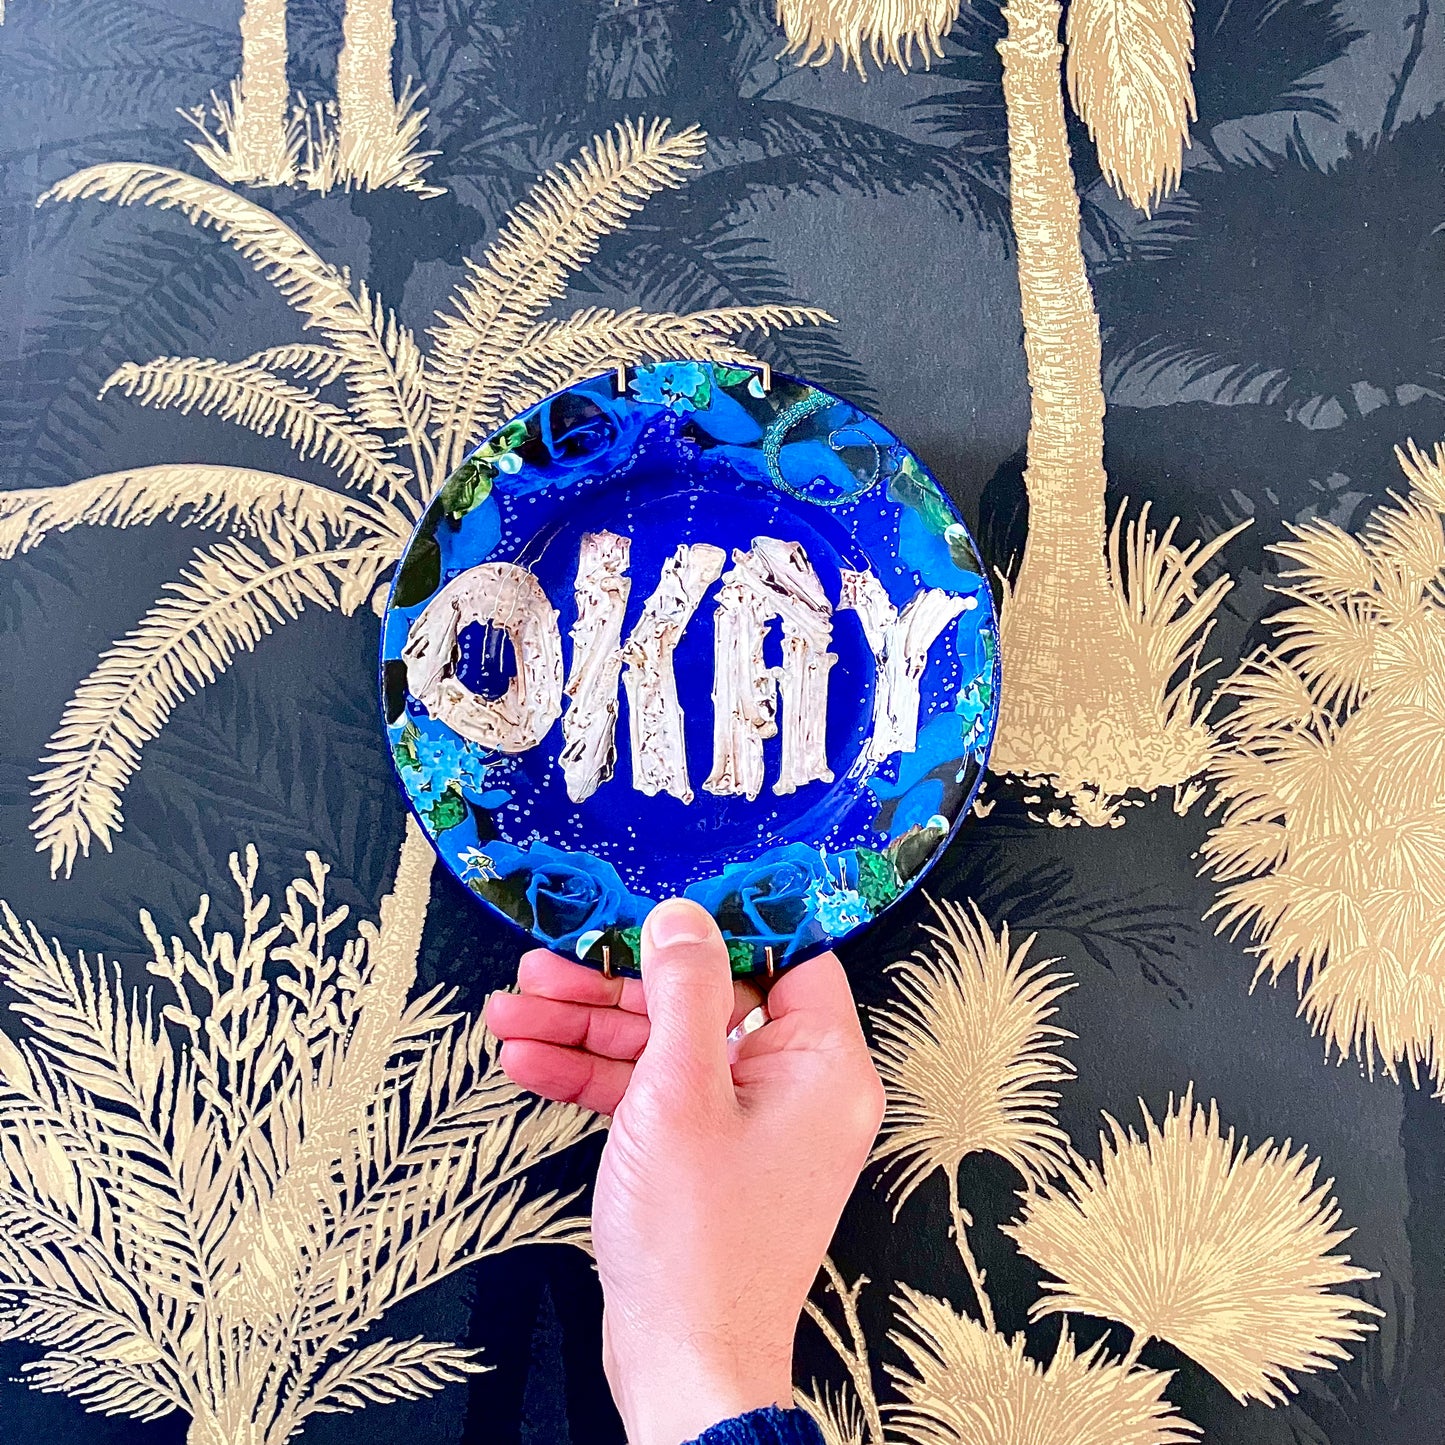 House of Frisson's "Okay" Wall Plate one-of-a-kind collage artwork on up-cycled plate. Holding the plate against a wallpaper.